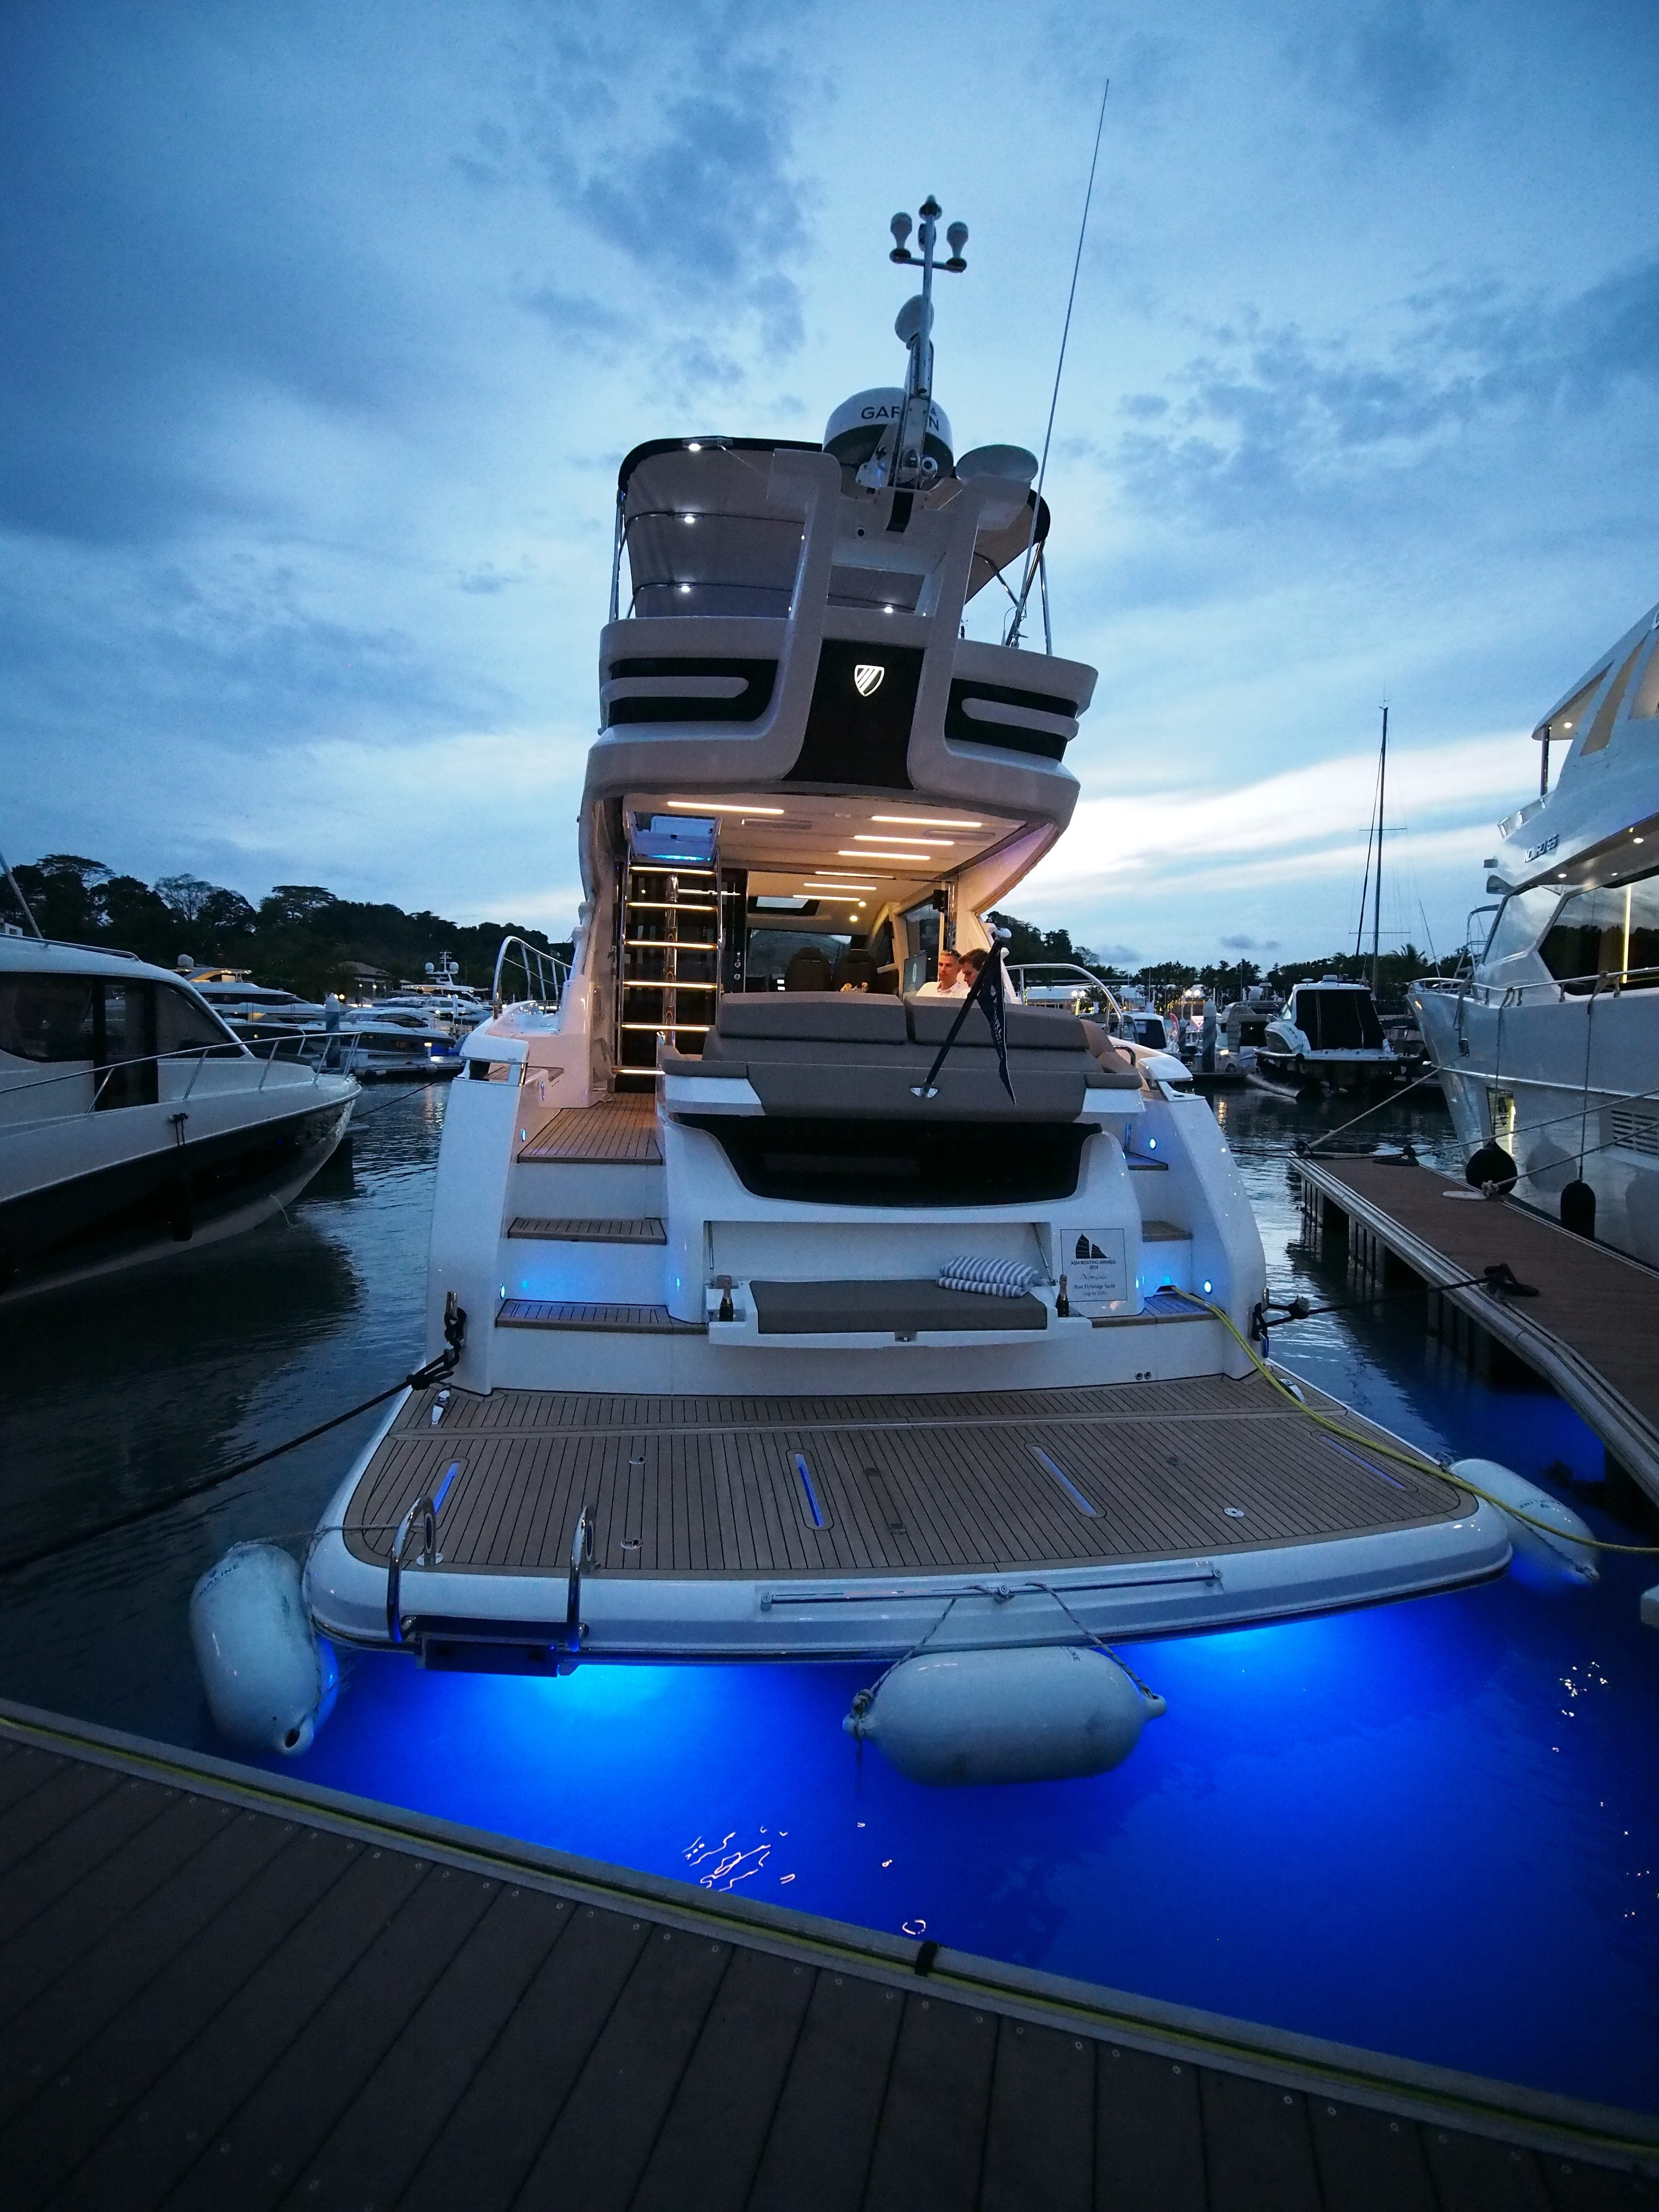 The luxurious Fairline Squadron 53 at the Singapore Yacht Show 2019